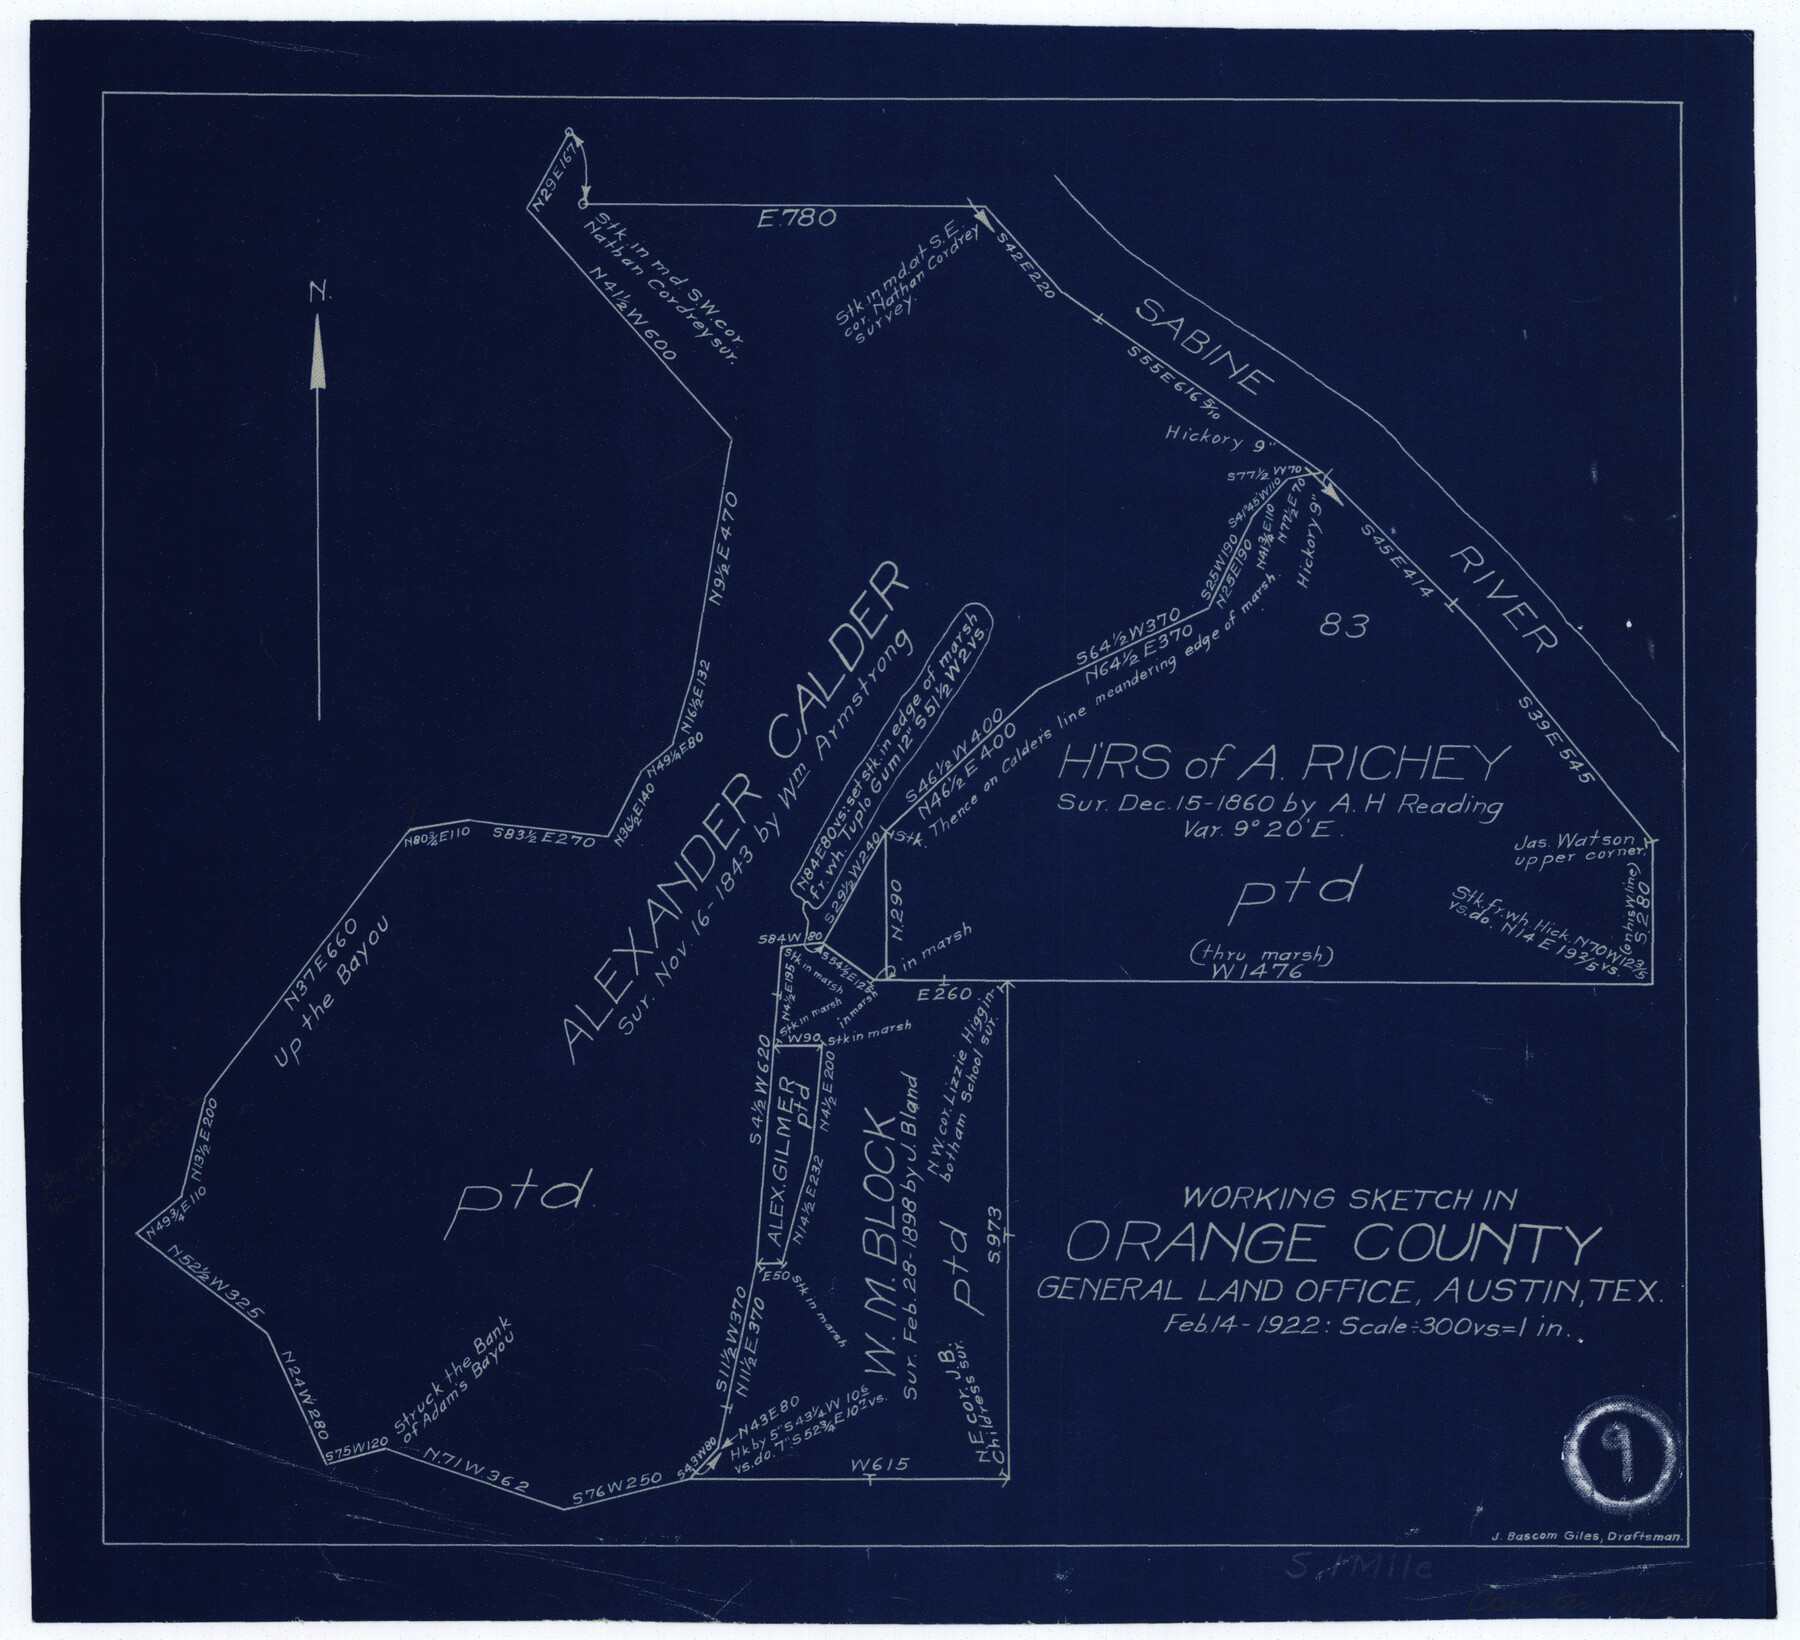 71341, Orange County Working Sketch 9, General Map Collection